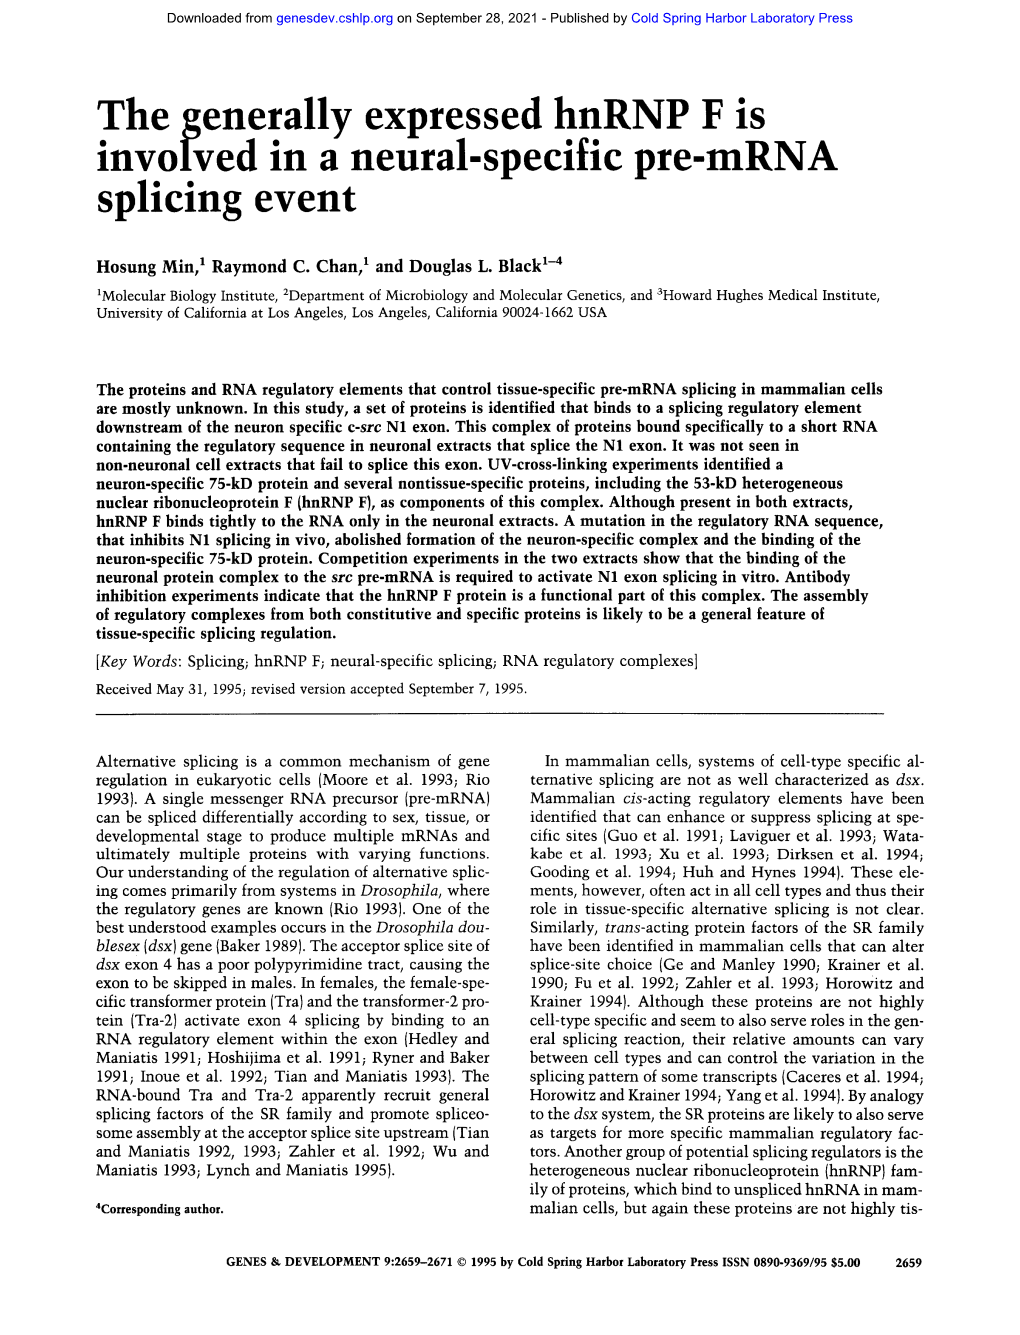 The Generally Expressed Hnrnp F Is Involved in a Neural-Specific Pre-Mr Splicing Event